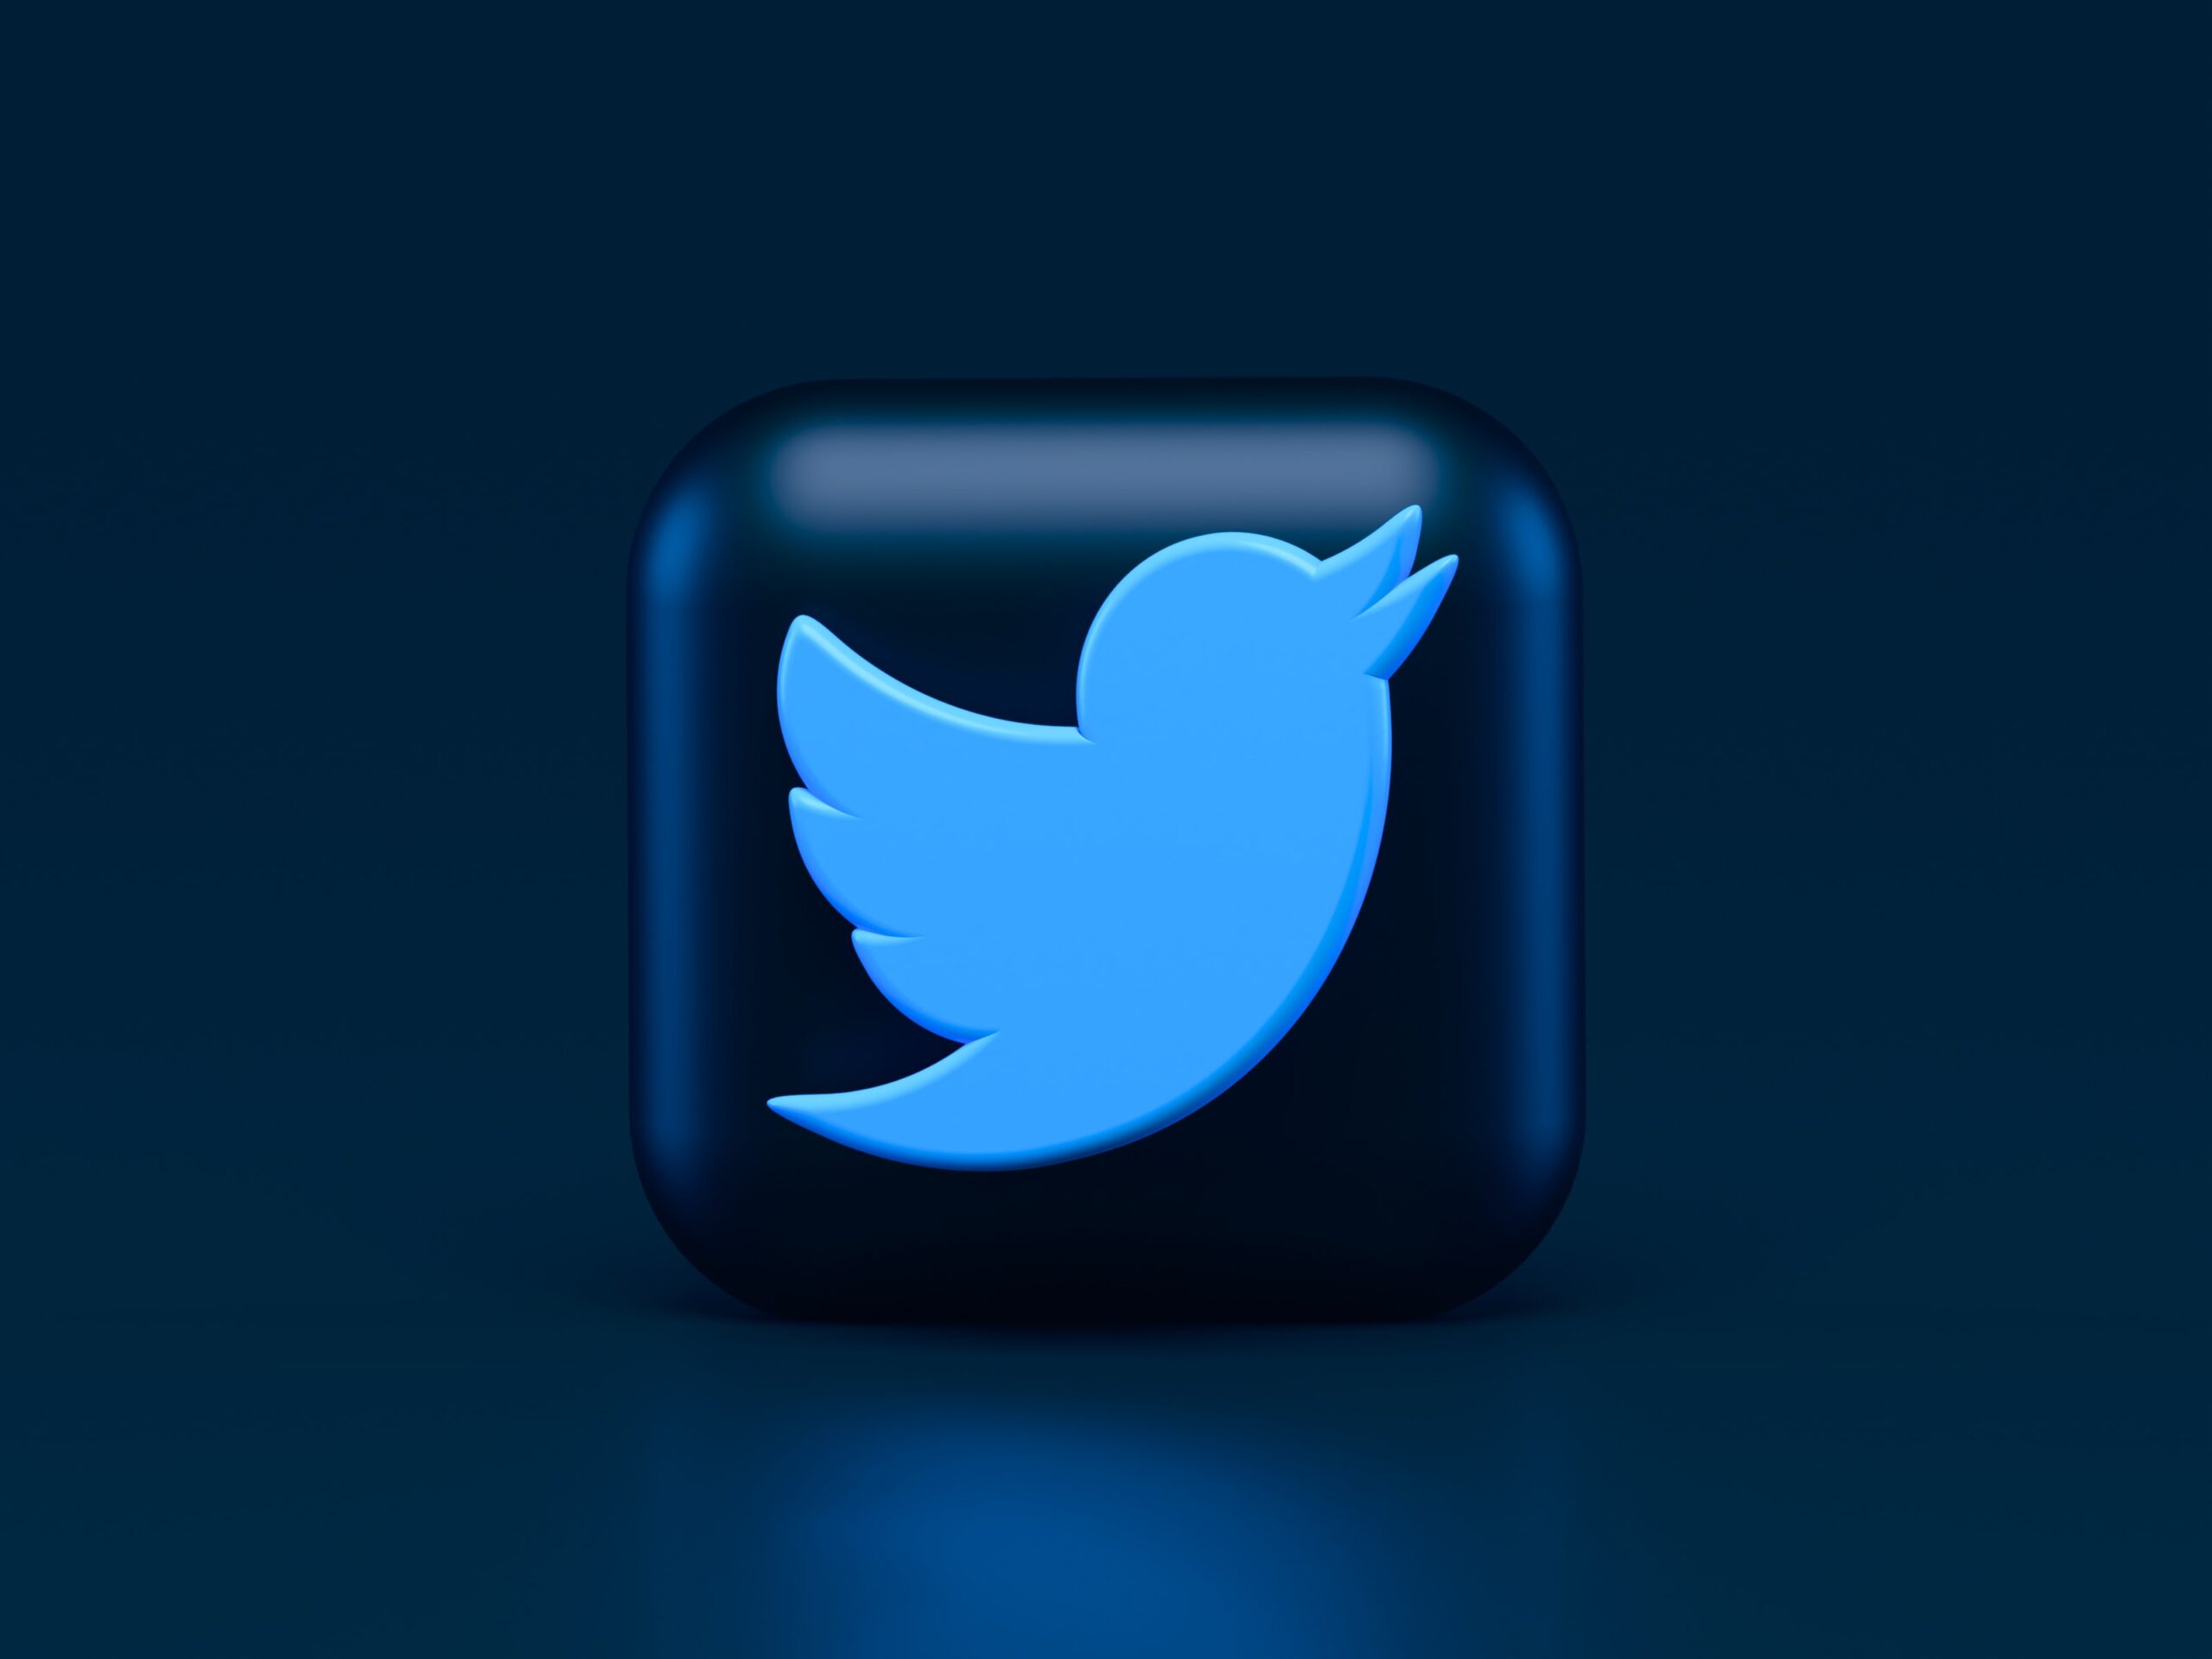 Using Twitter Spaces on iOS: A Guide To Getting Started With The New Feature